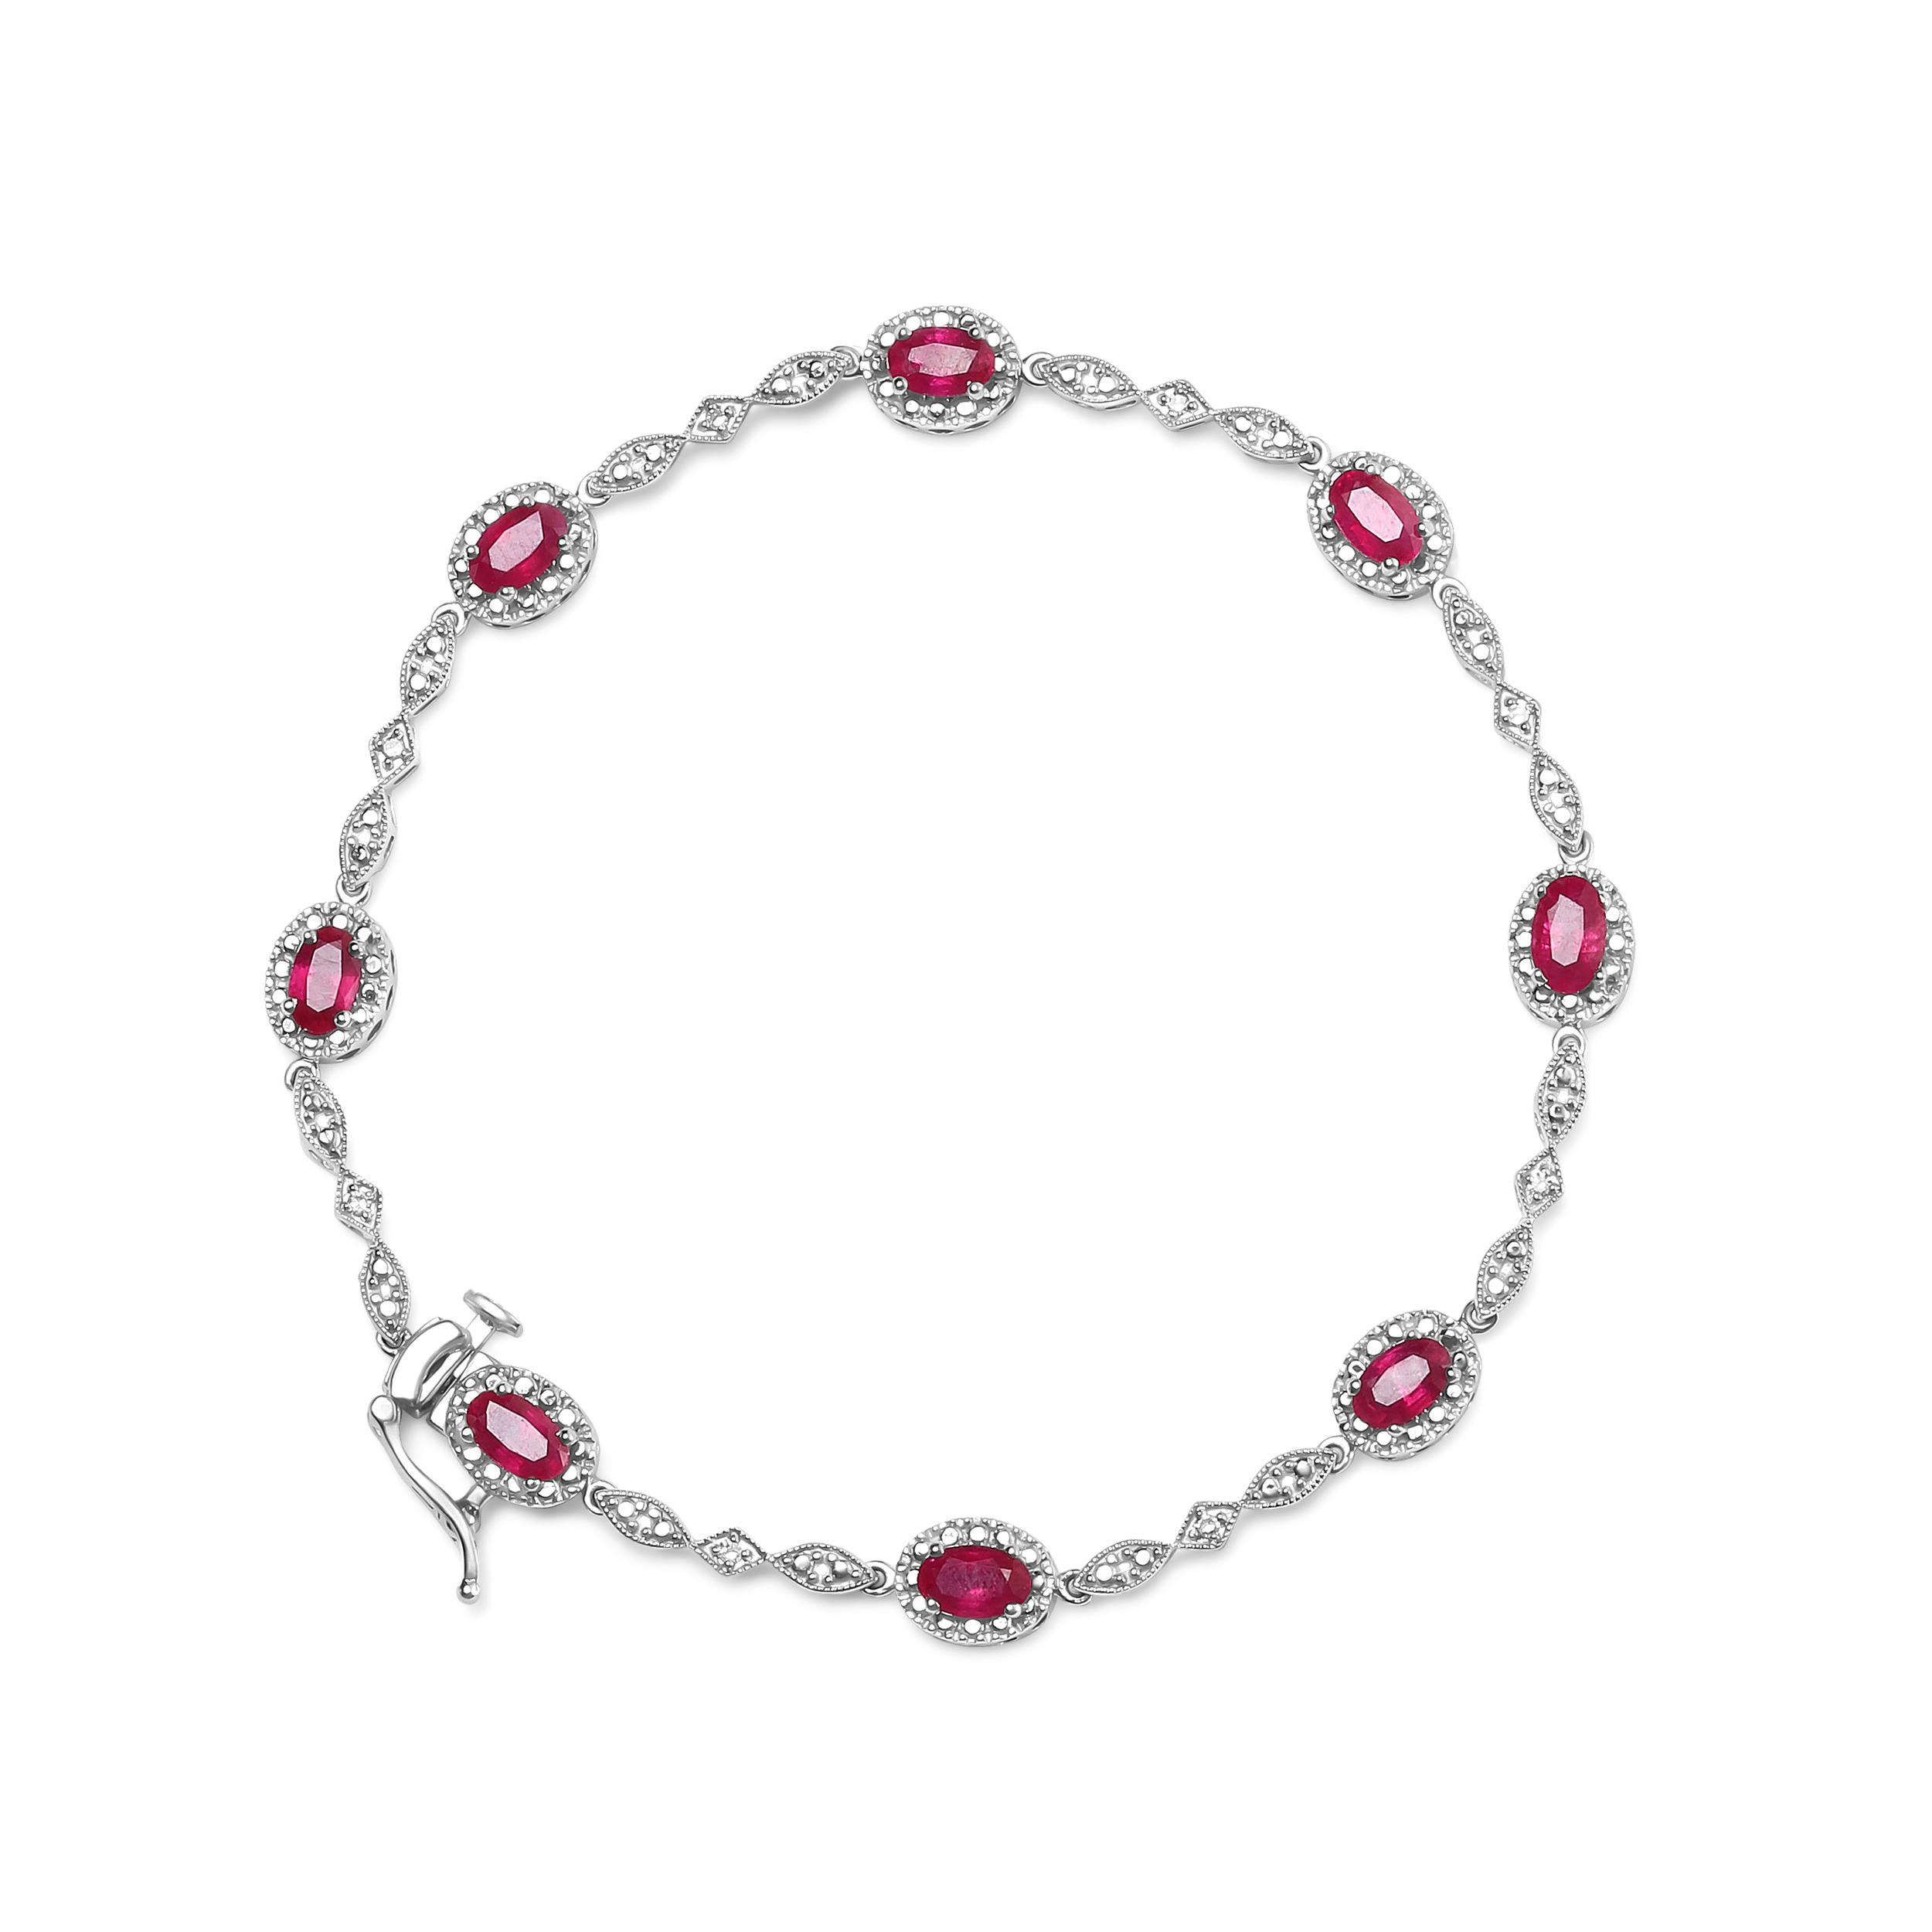 Behold this stunning link bracelet, fit for a queen. Crafted from lustrous 10K white gold, it features eight natural heat treated red rubies, each elegantly cut into an oval shape measuring 4.5mm x 3mm. The rubies are perfectly complemented by eight